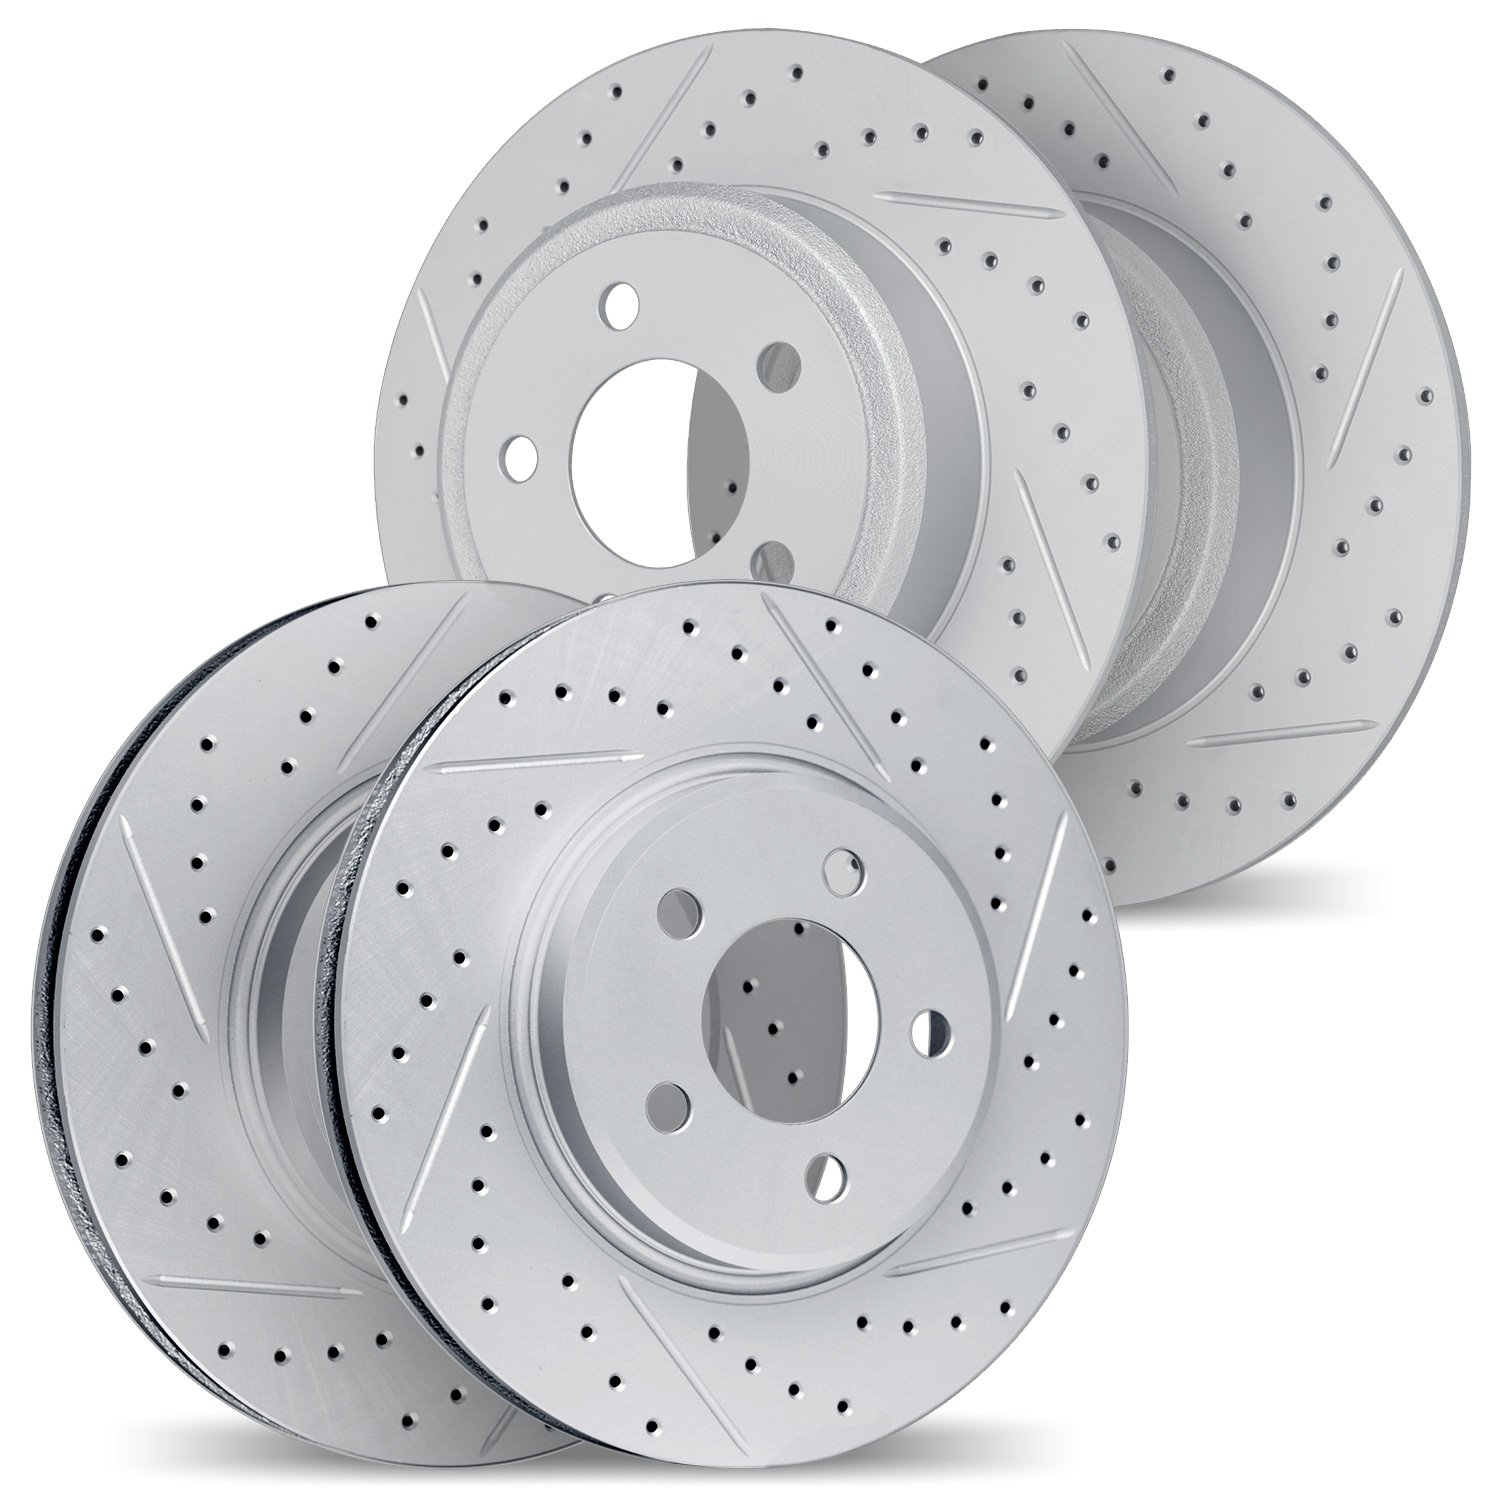 2004-76059 Geoperformance Drilled/Slotted Brake Rotors, Fits Select Lexus/Toyota/Scion, Position: Front and Rear